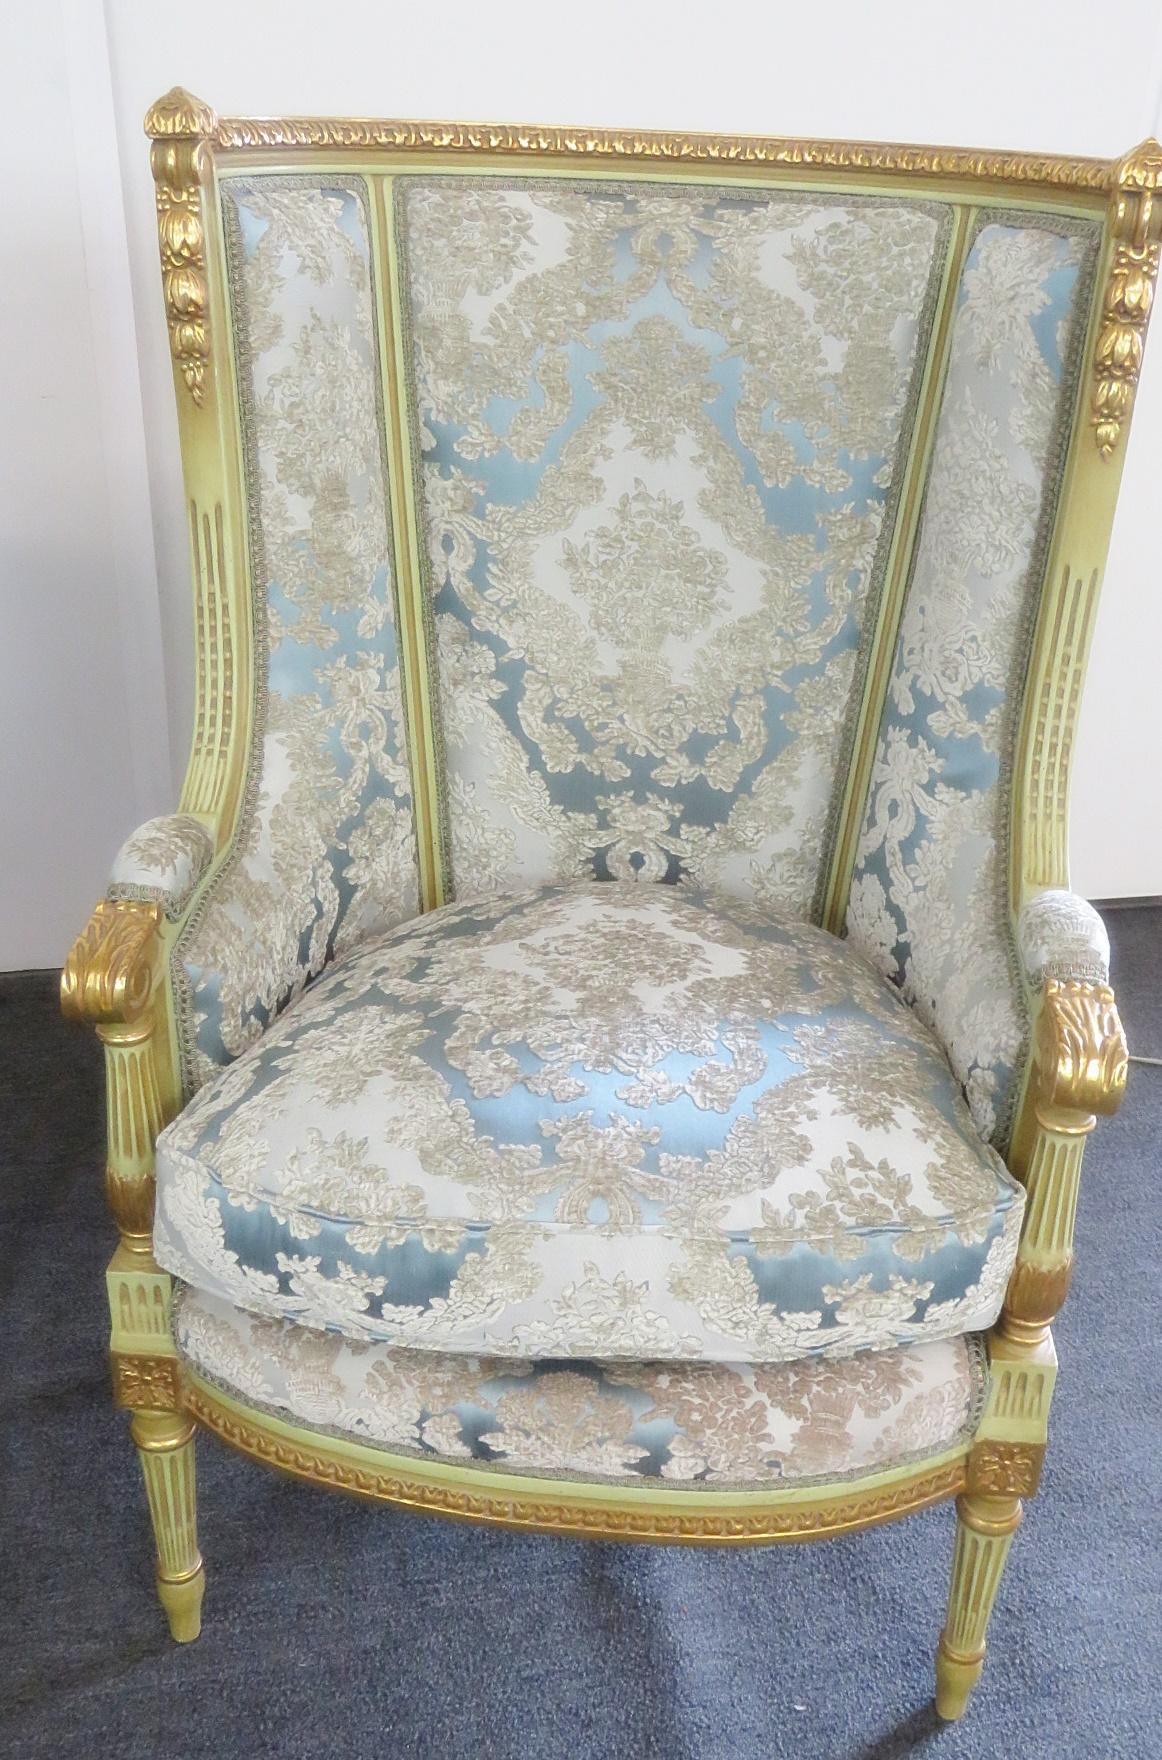 Pair of Louis XVI style paint decorated wing back chairs with gilt accents and textured upholstery.